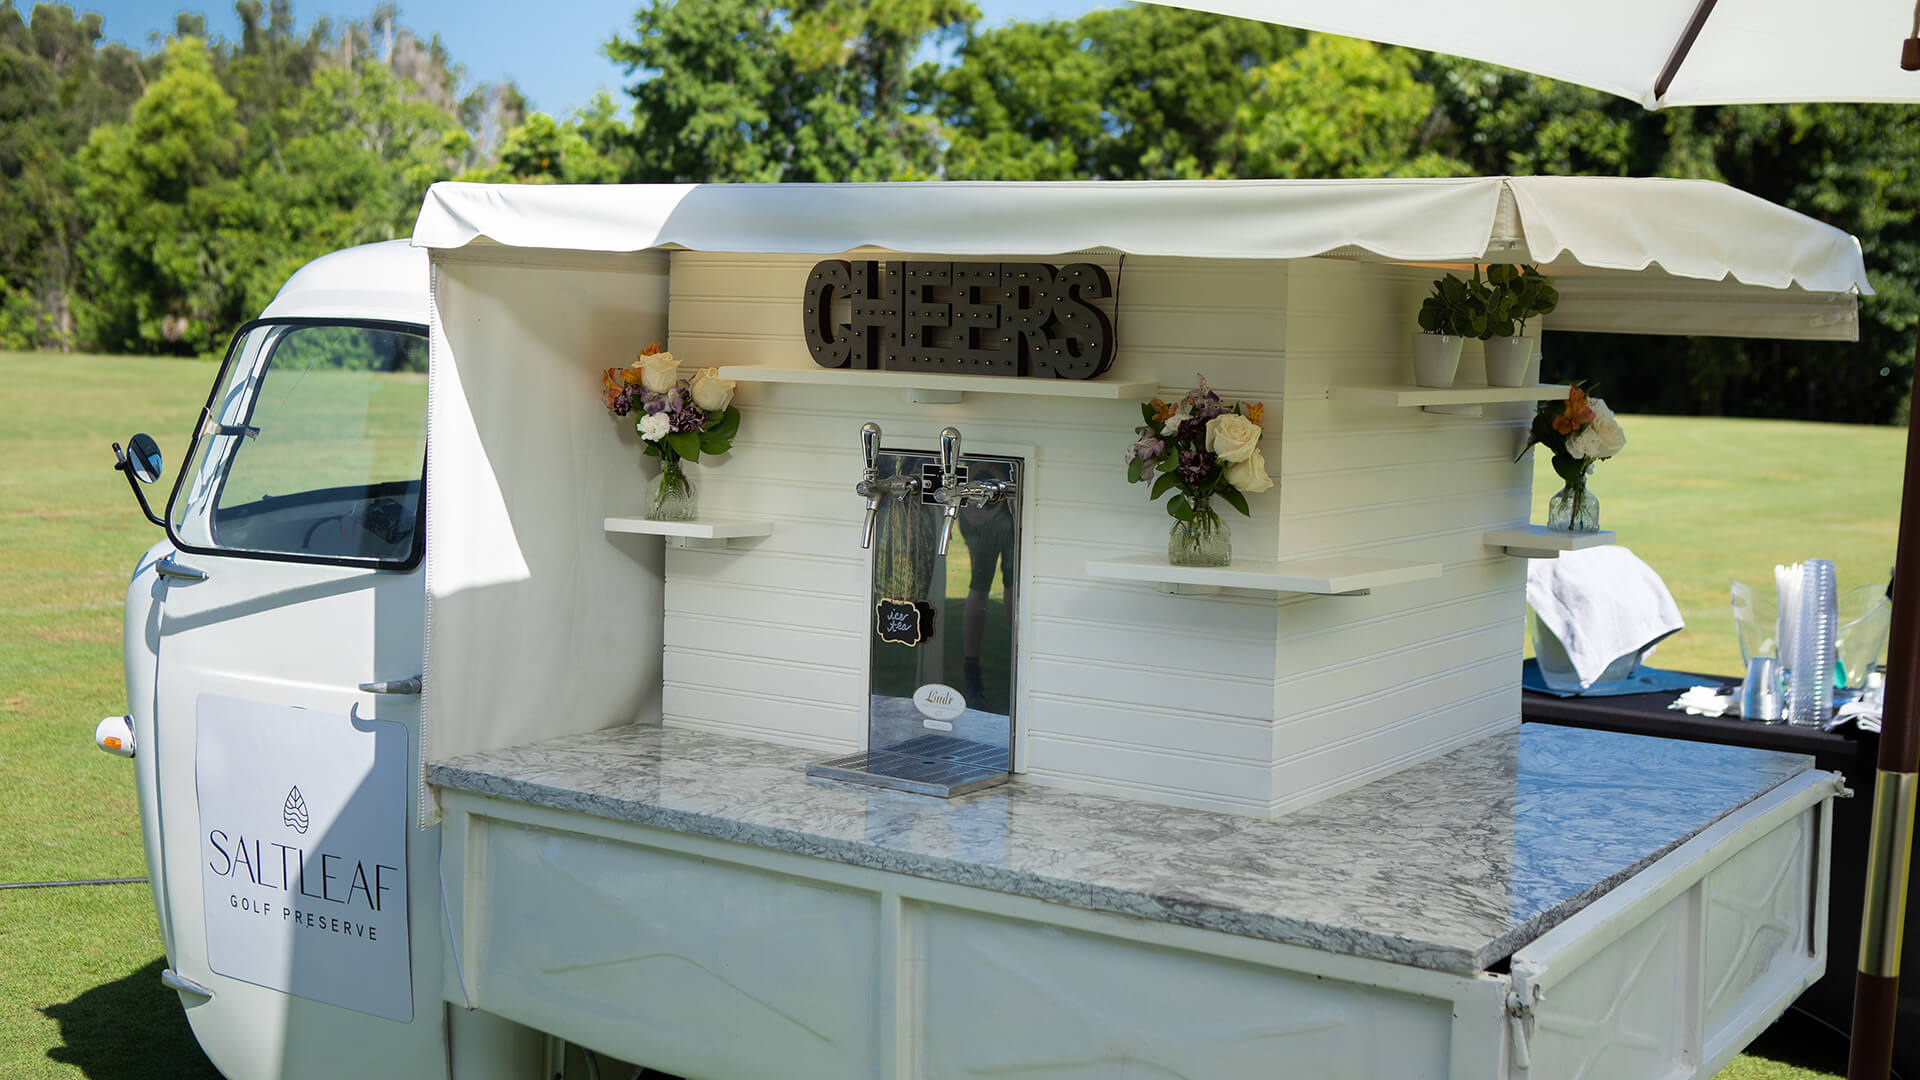 A vw bus transformed into a unique mobile bar, perfect for serving refreshing beverages atop the scenic Saltleaf Golf Preserve in Bonita Springs.